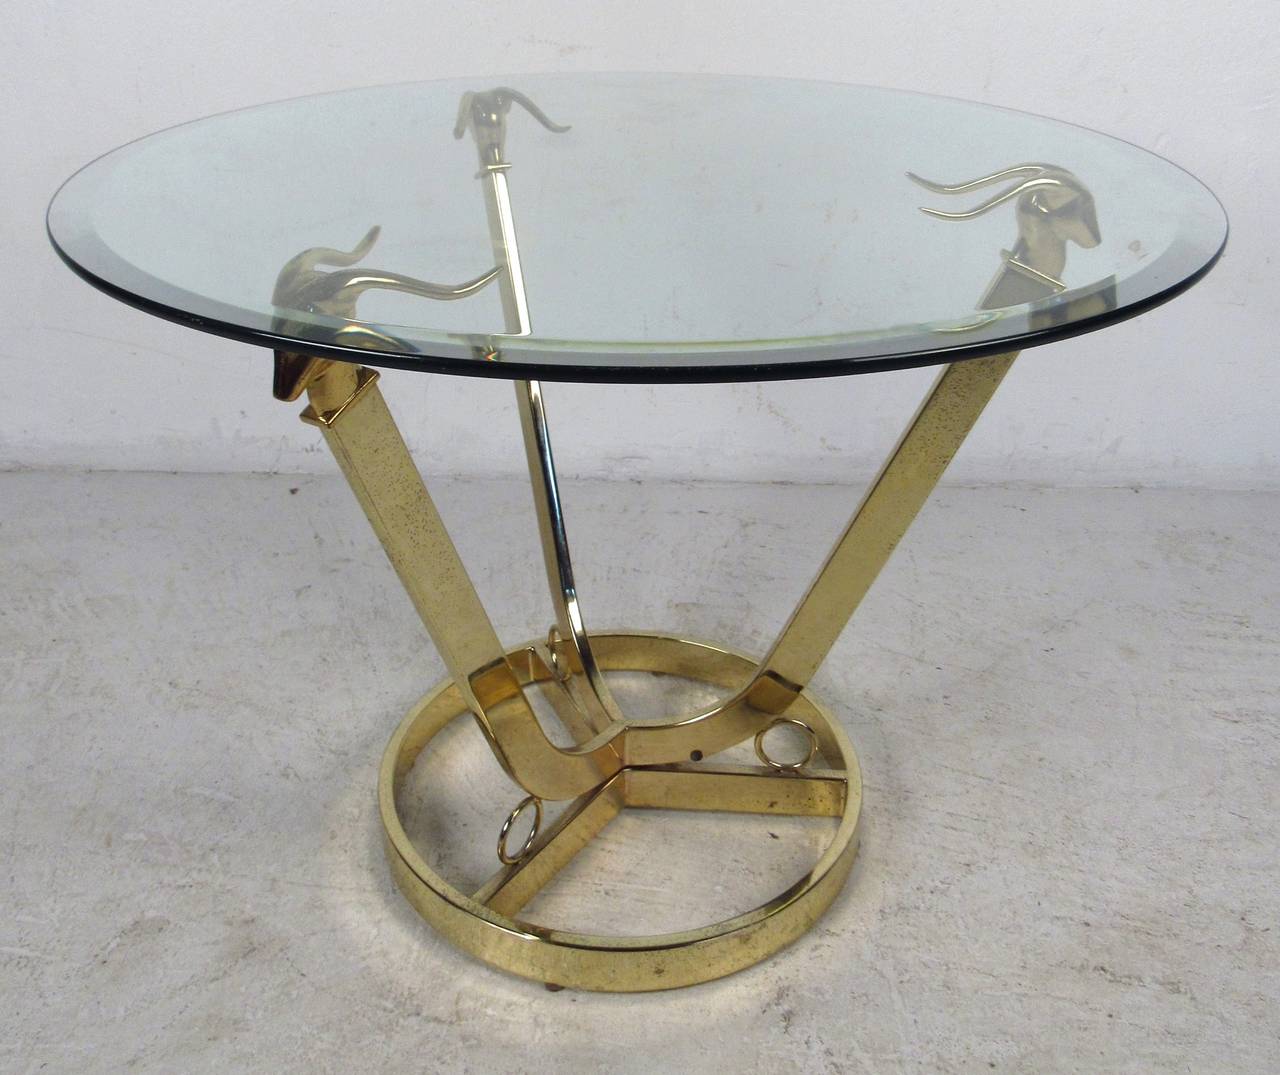 Modern glass top table with flat bar brass-plated three arm base featuring decorative animal head supports. A versatile size that functions as a coffee table or a large side table. This stunning contemporary modern end table makes the perfect eye